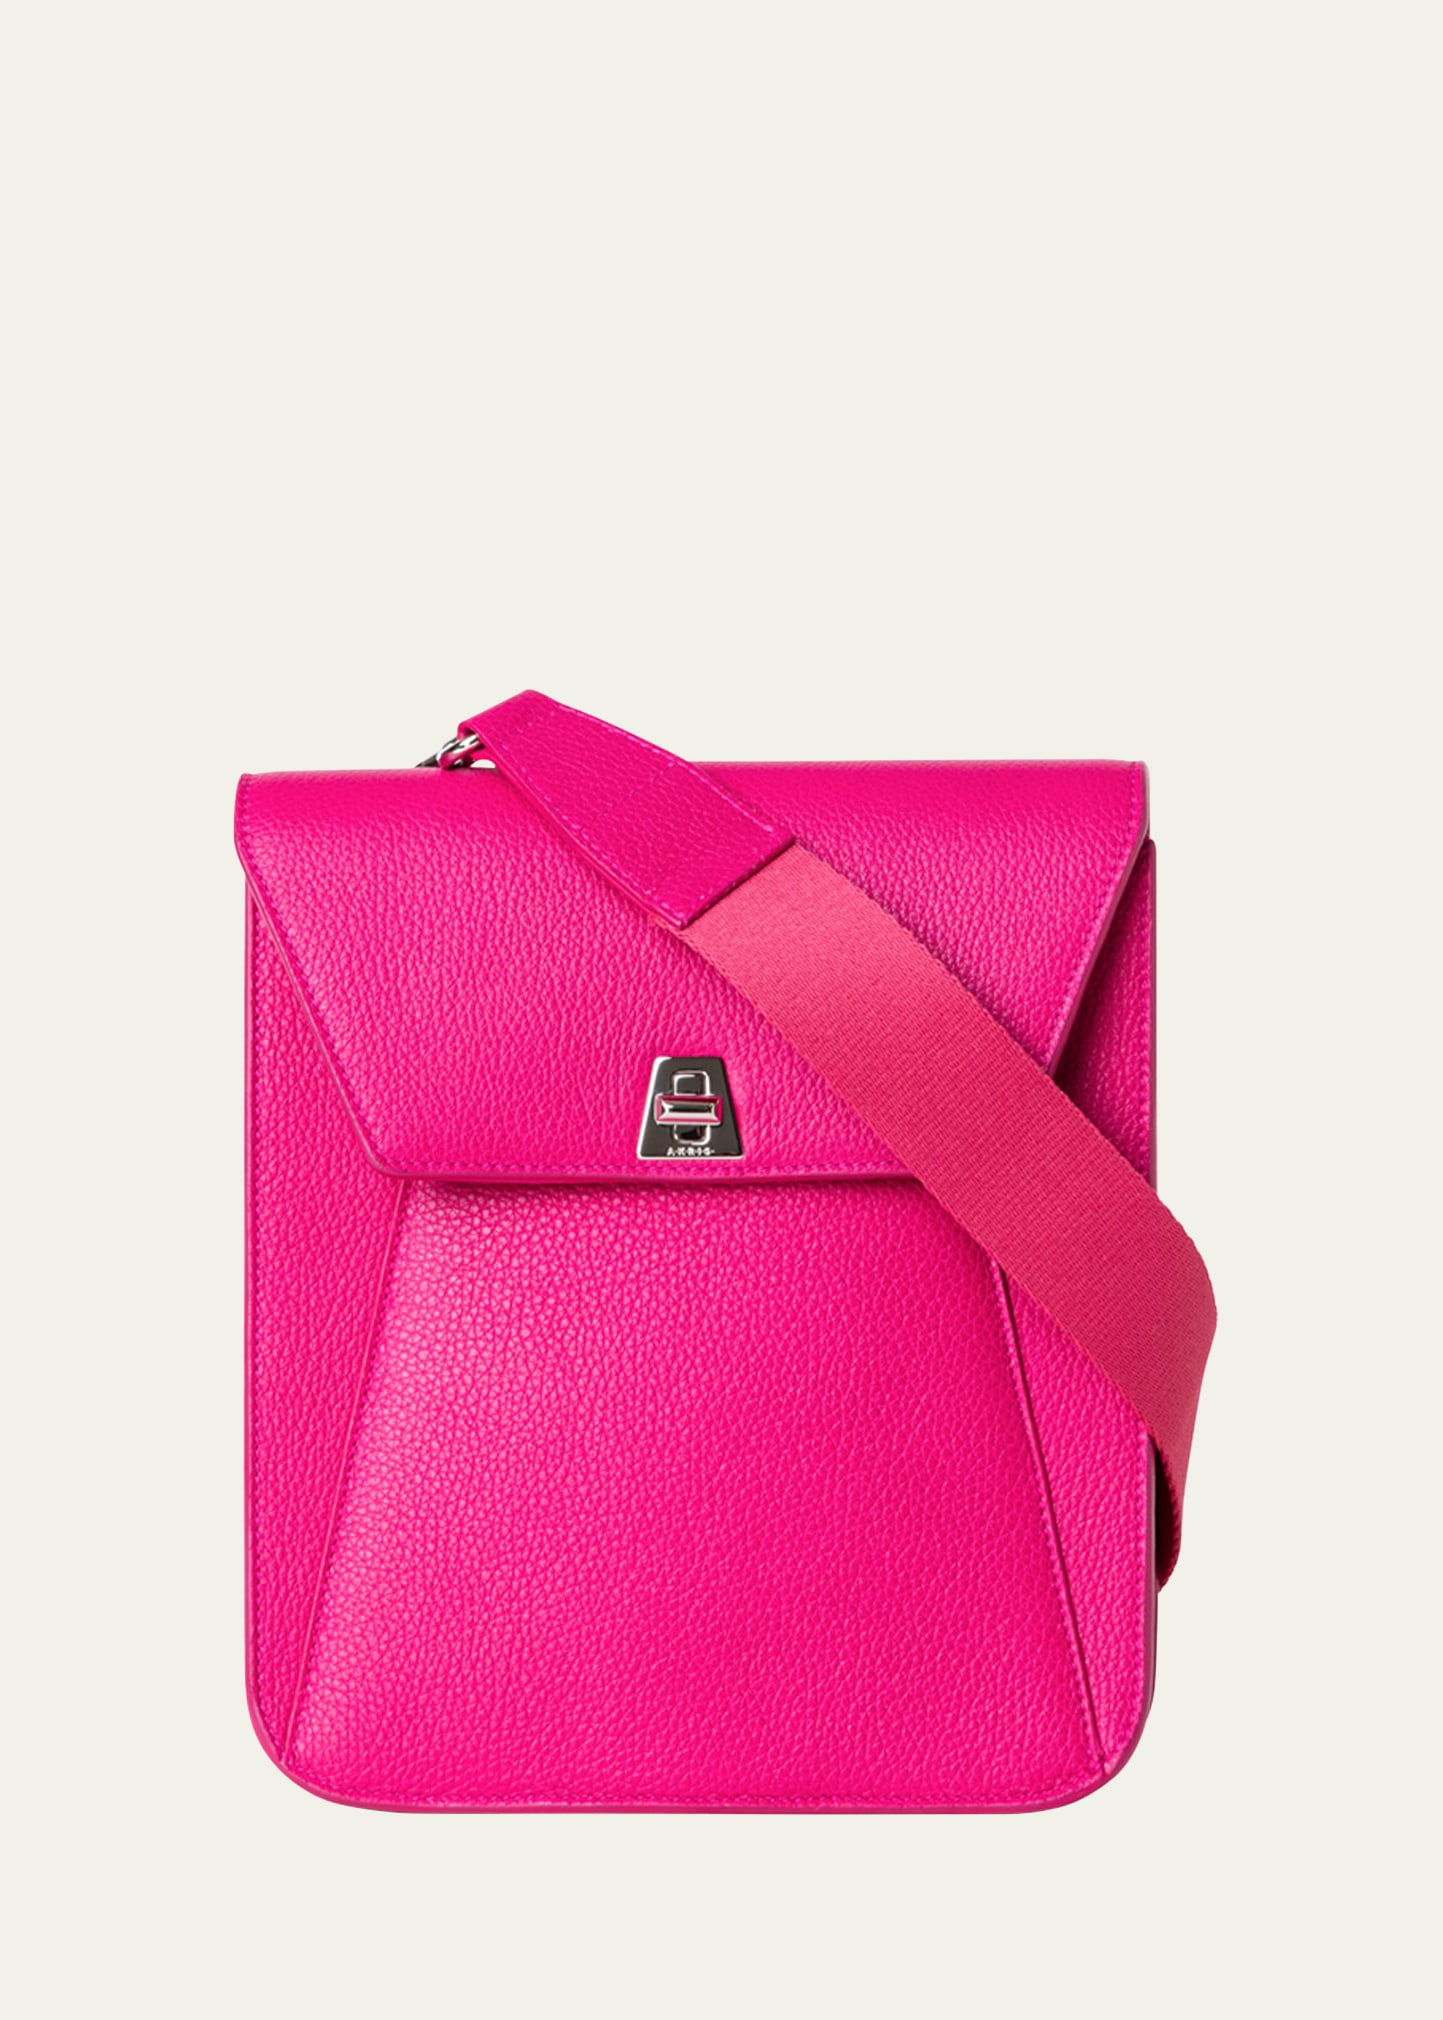 Little Anouk Messenger in Calf Leather